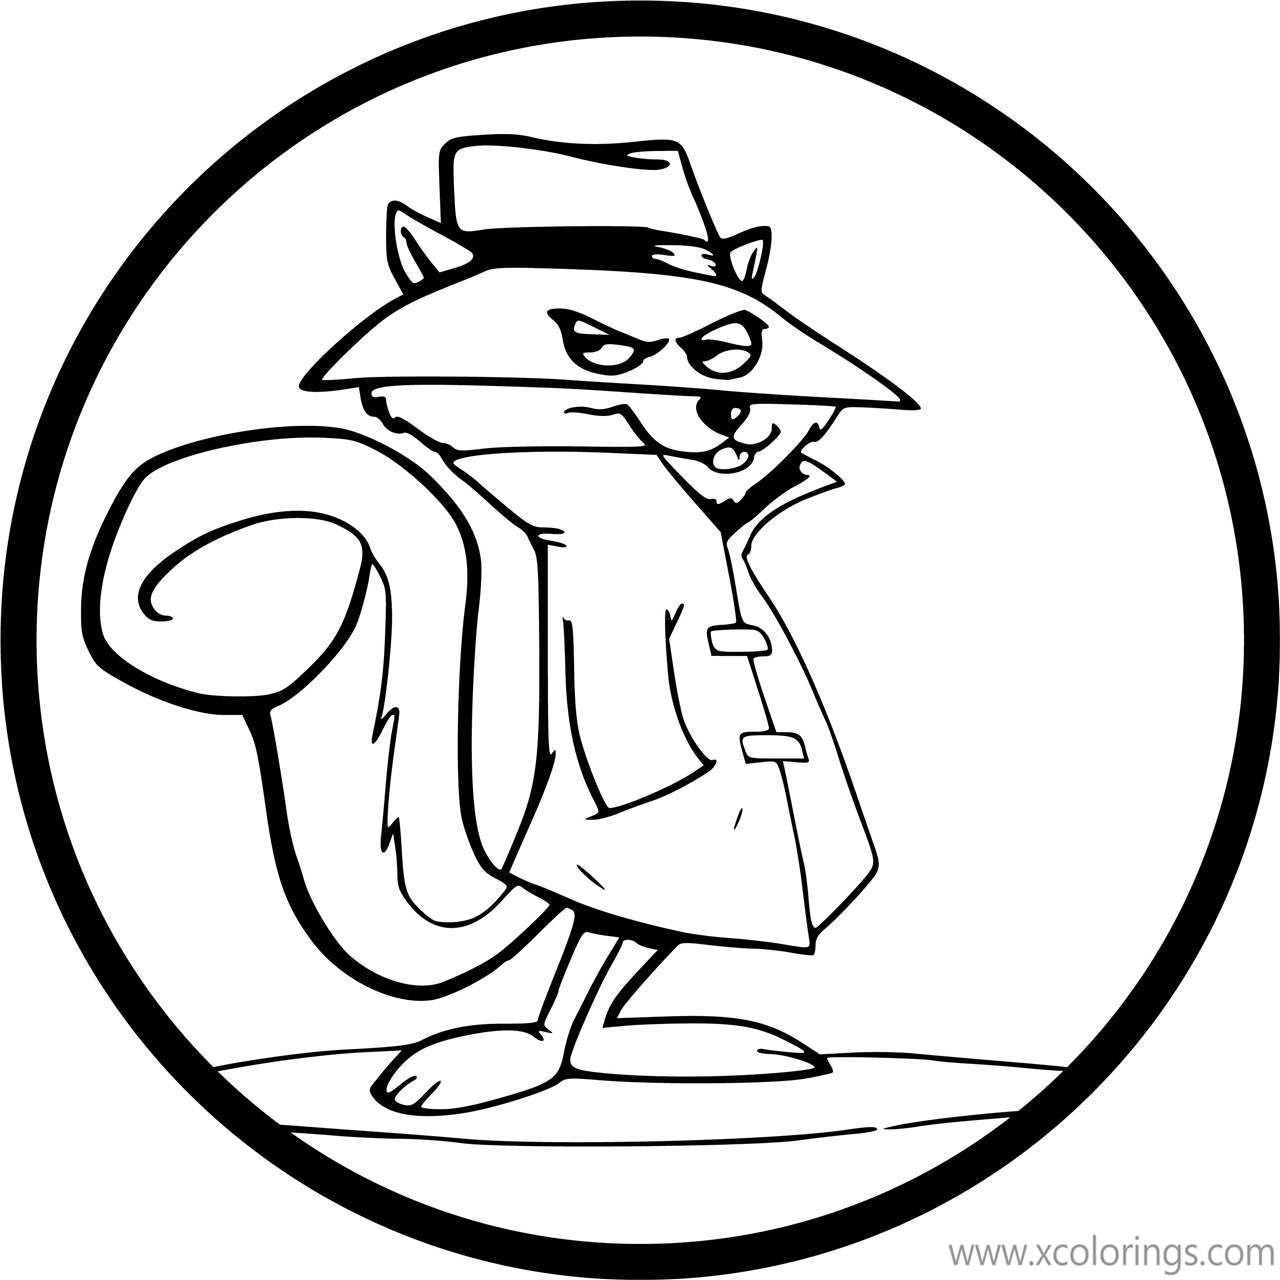 Free Secret Squirrel Coloring Page Sticker Template printable